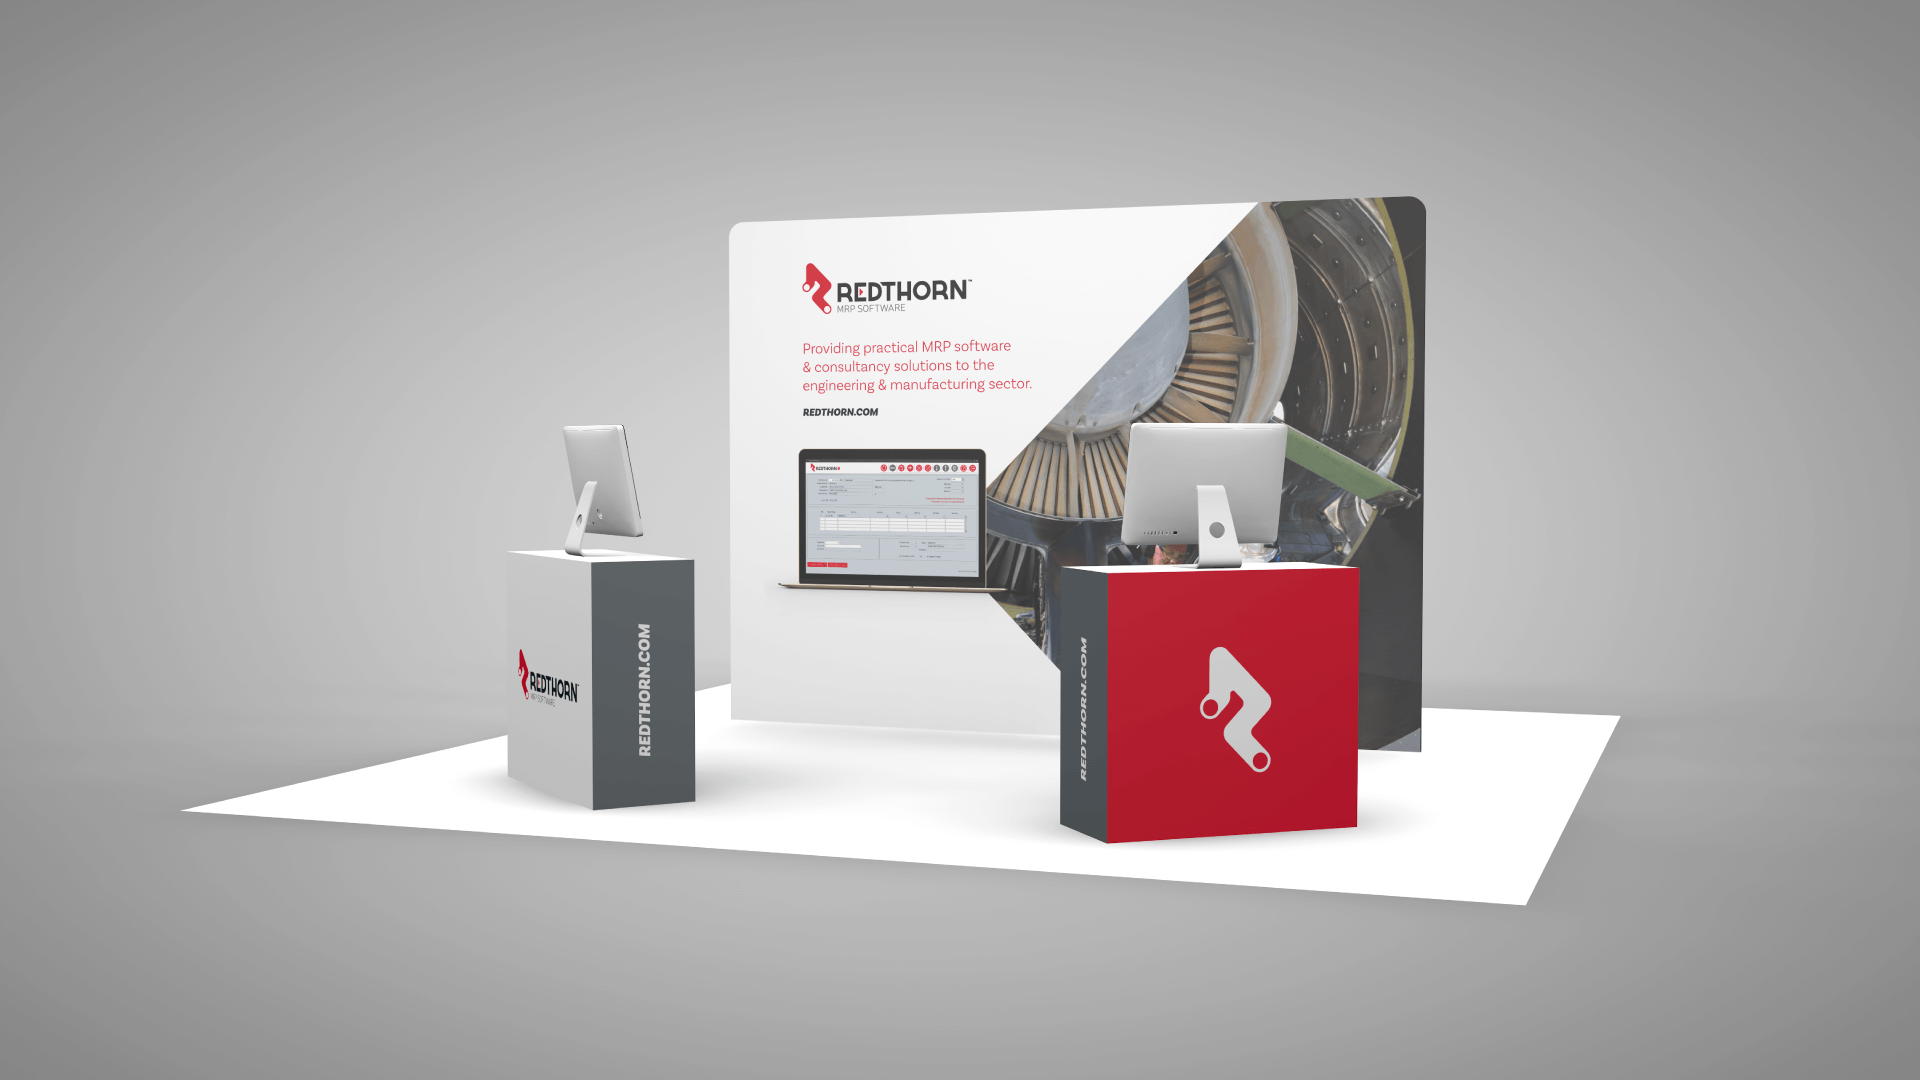 exhibition stand image perspective view